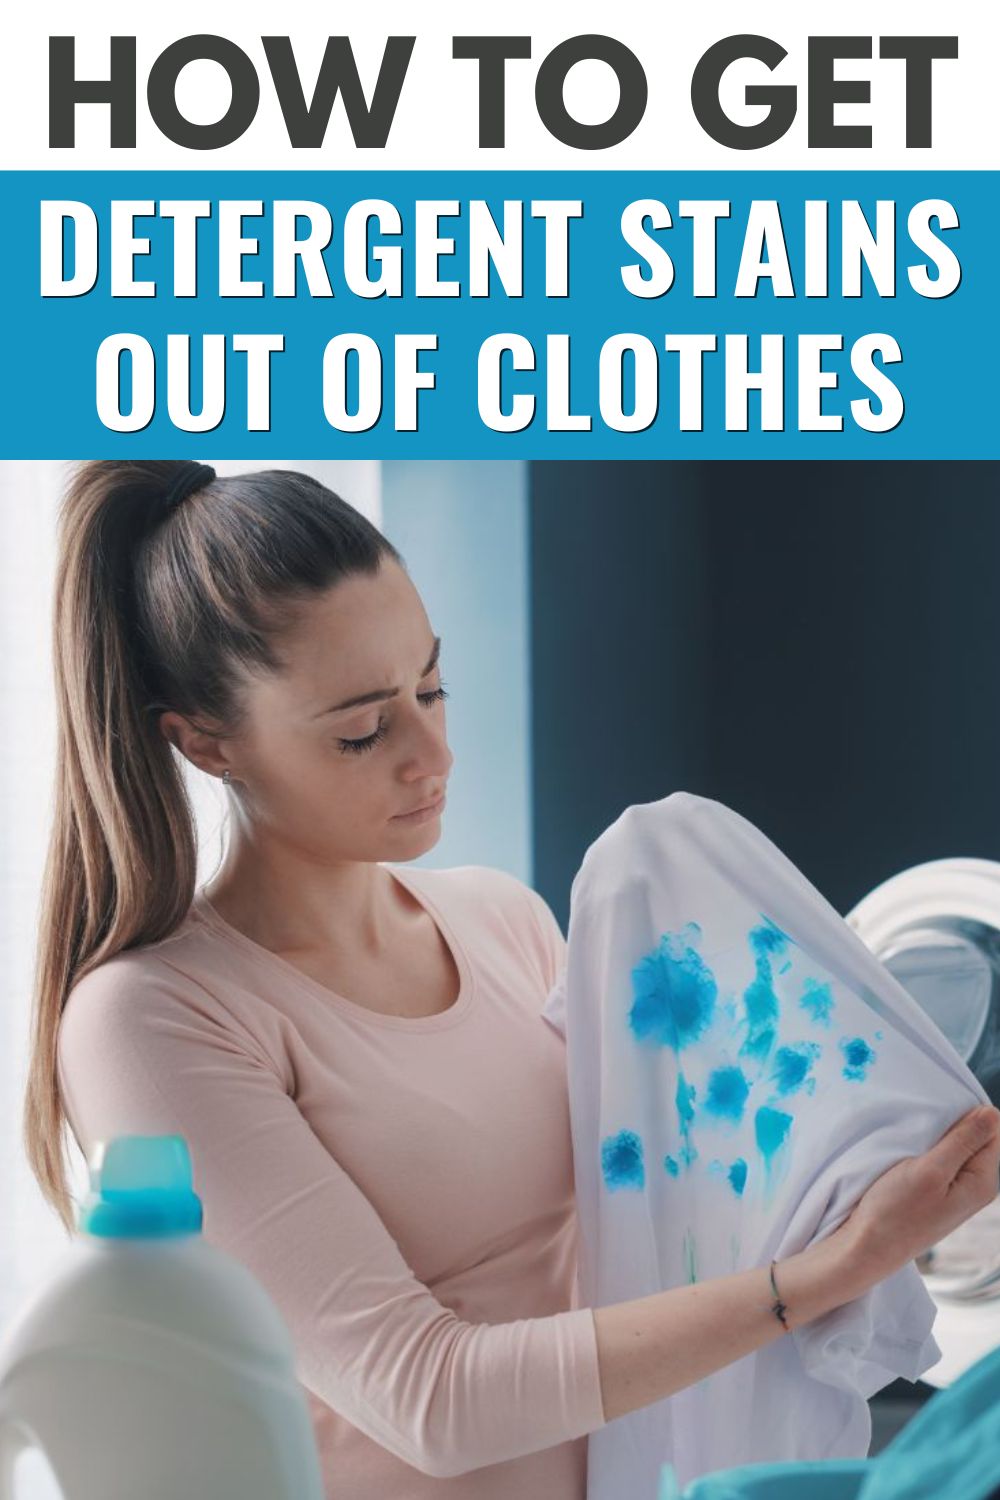 A woman holding a shirt with stains on it, wondering how to get rid of them.